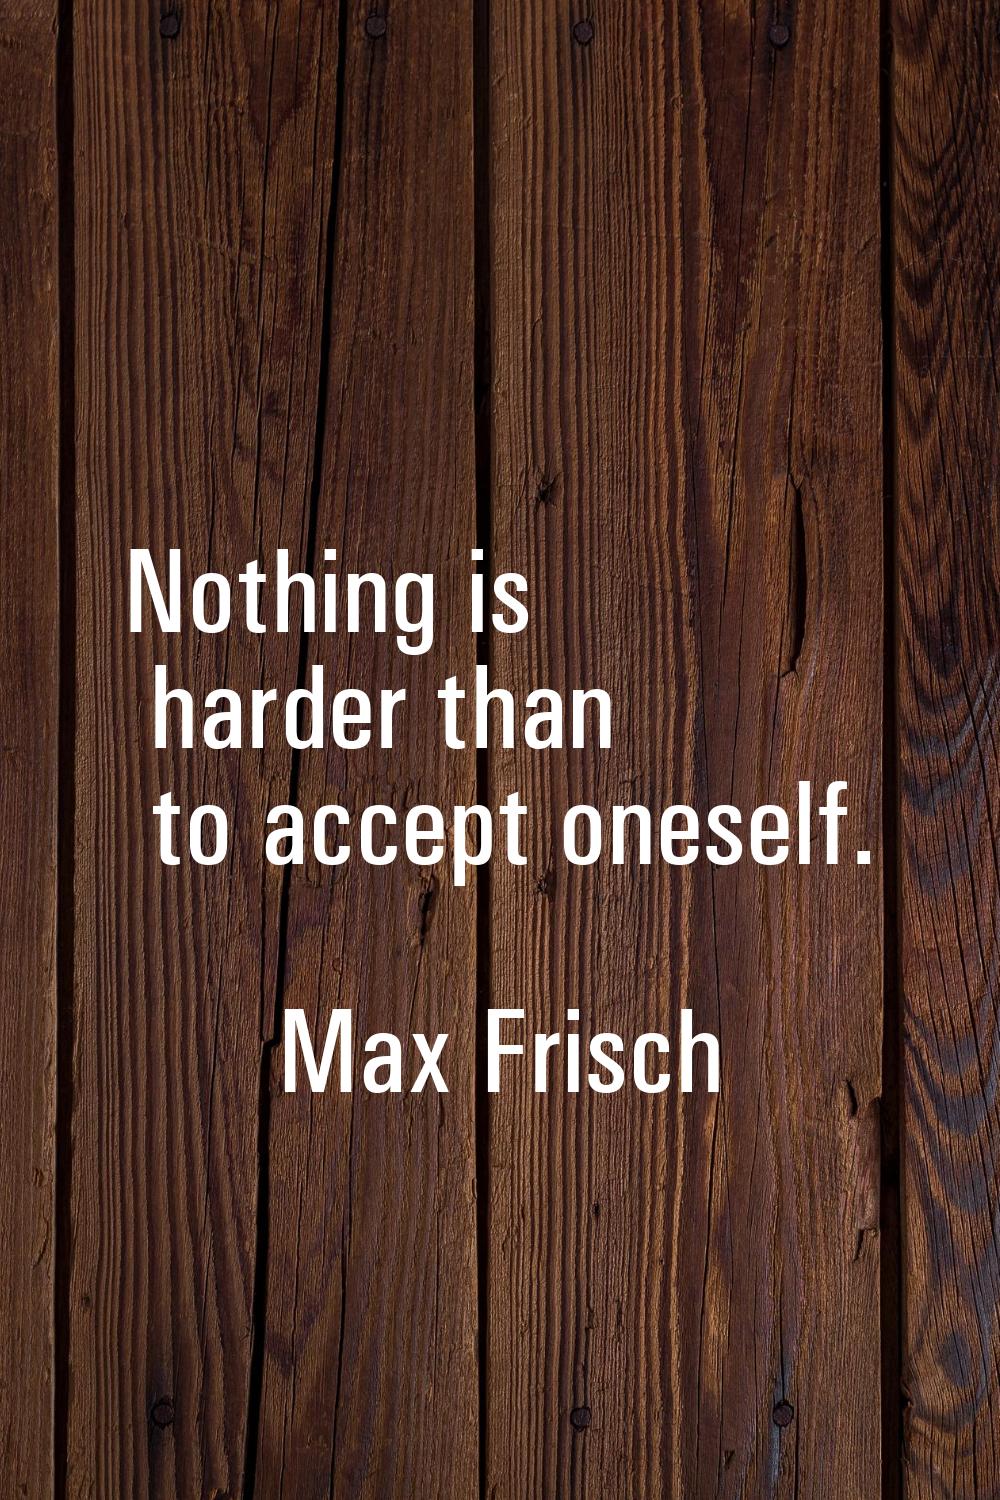 Nothing is harder than to accept oneself.